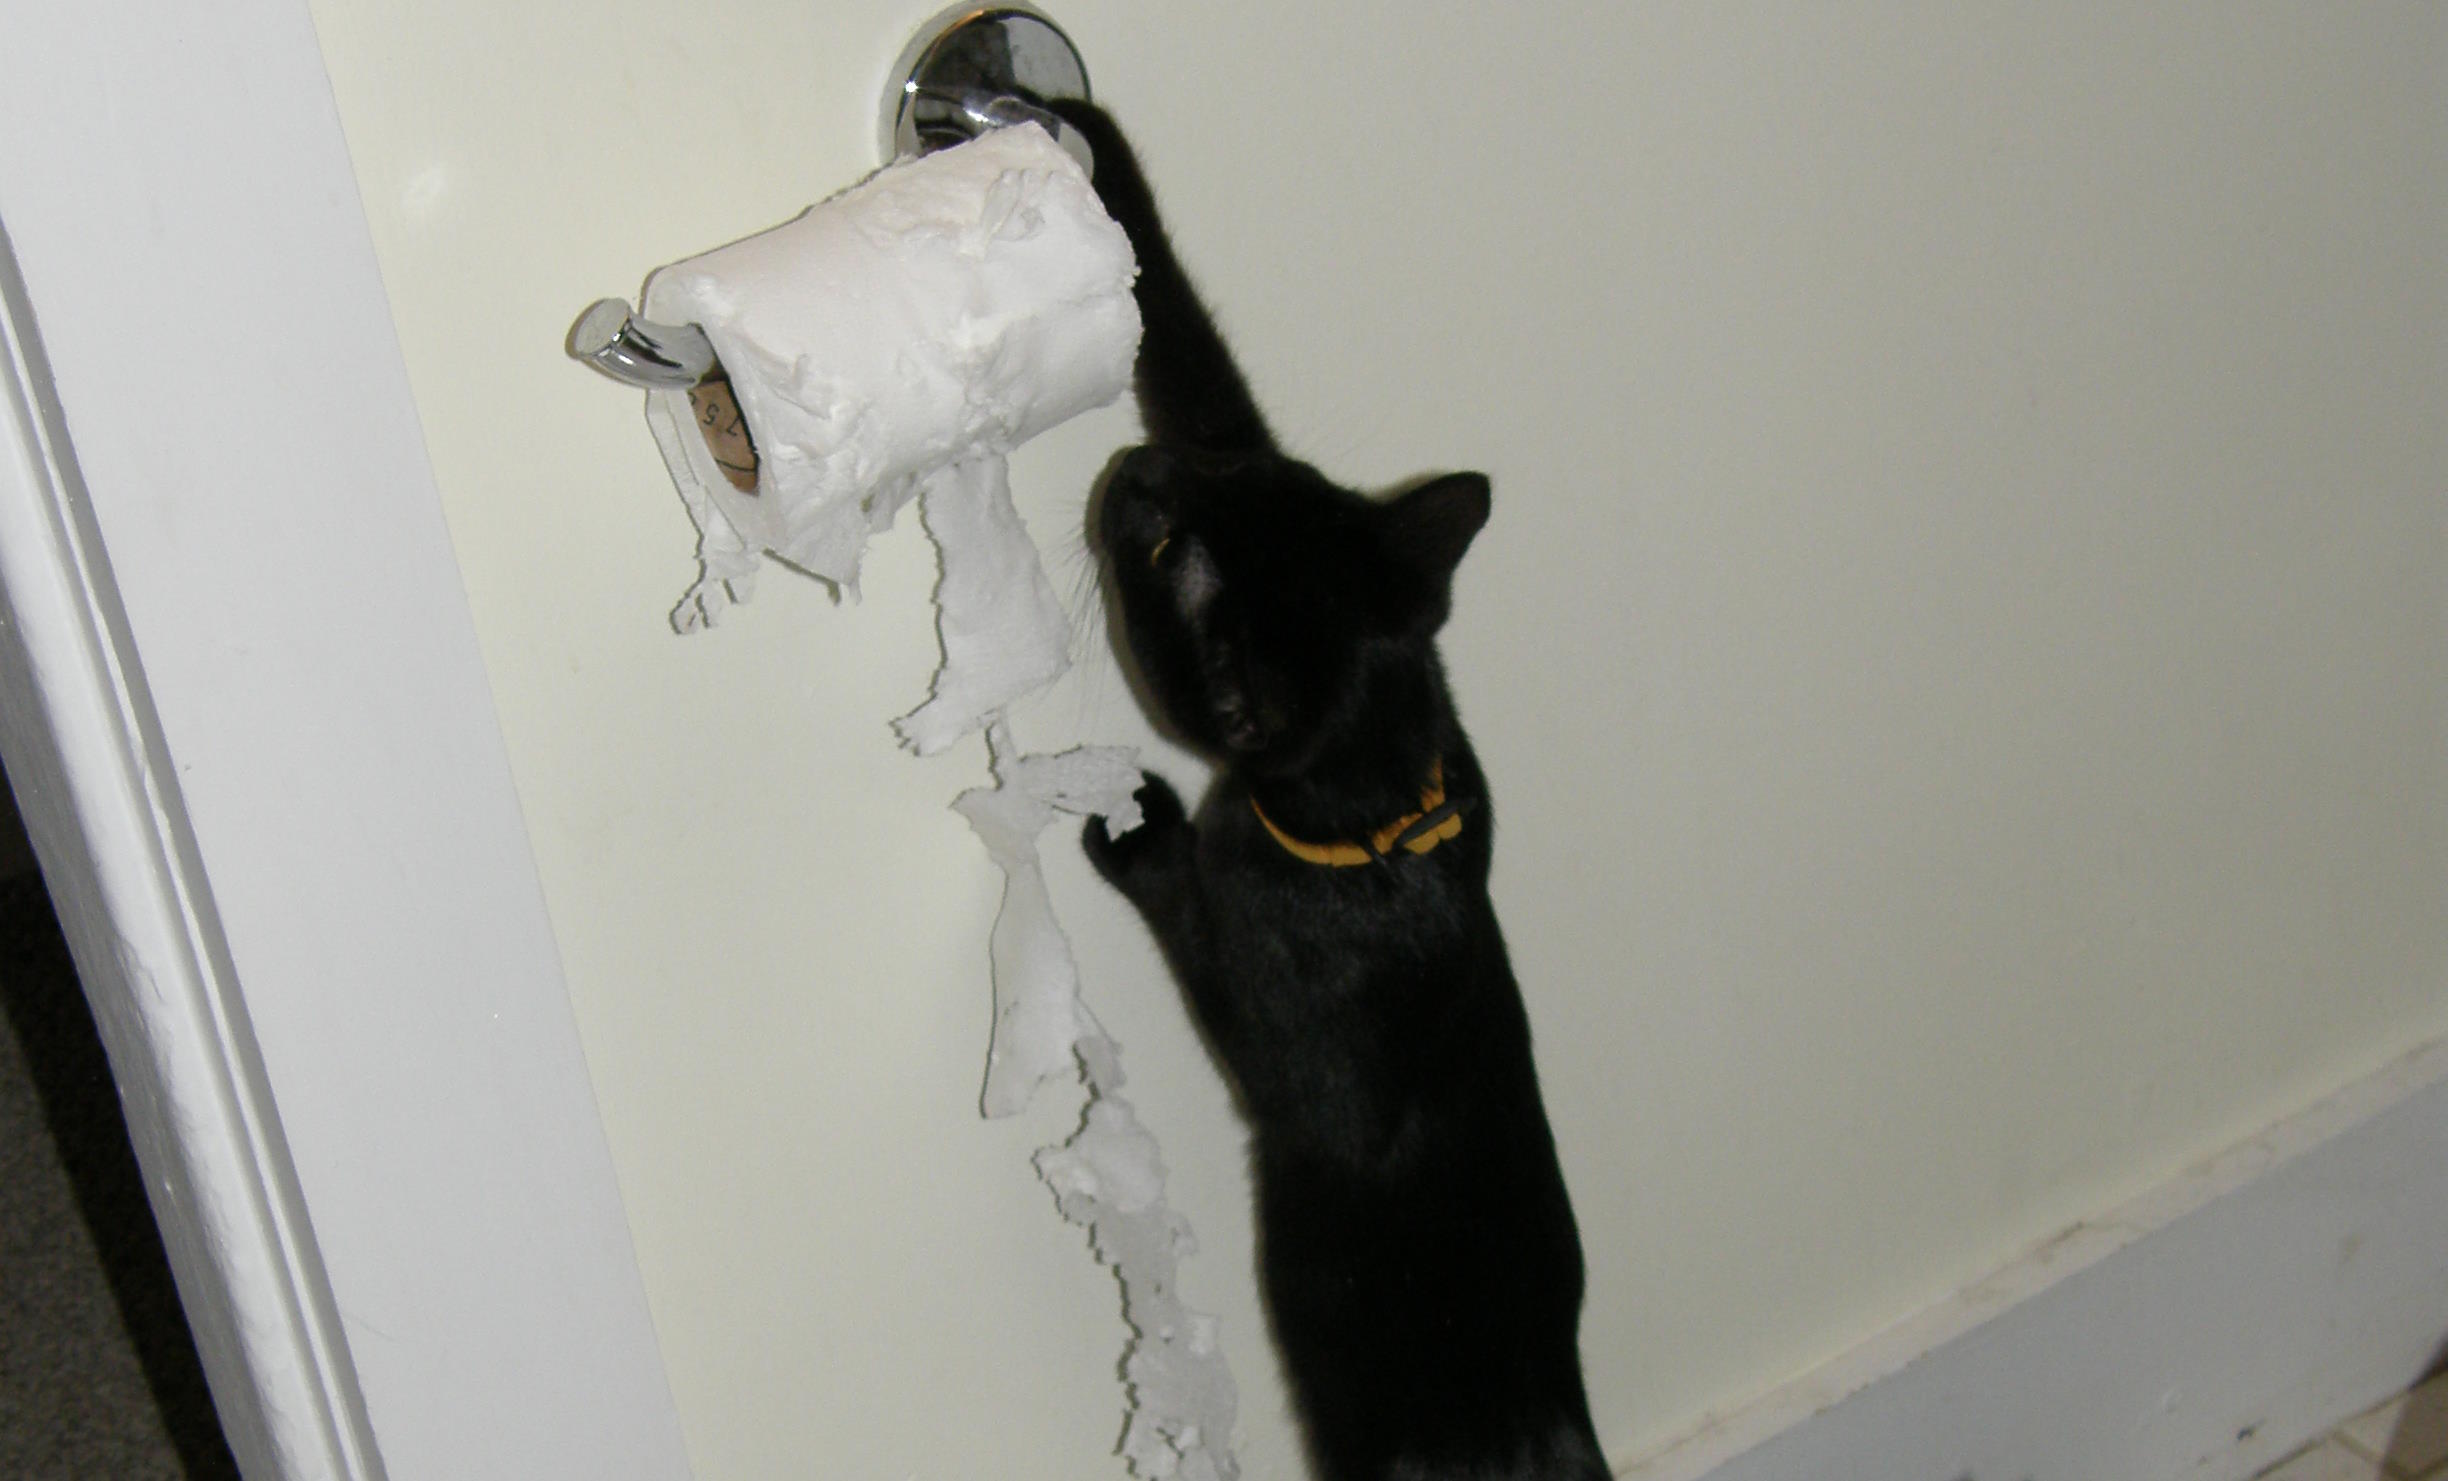 A hanging toilet roll being shredded by a black cat.